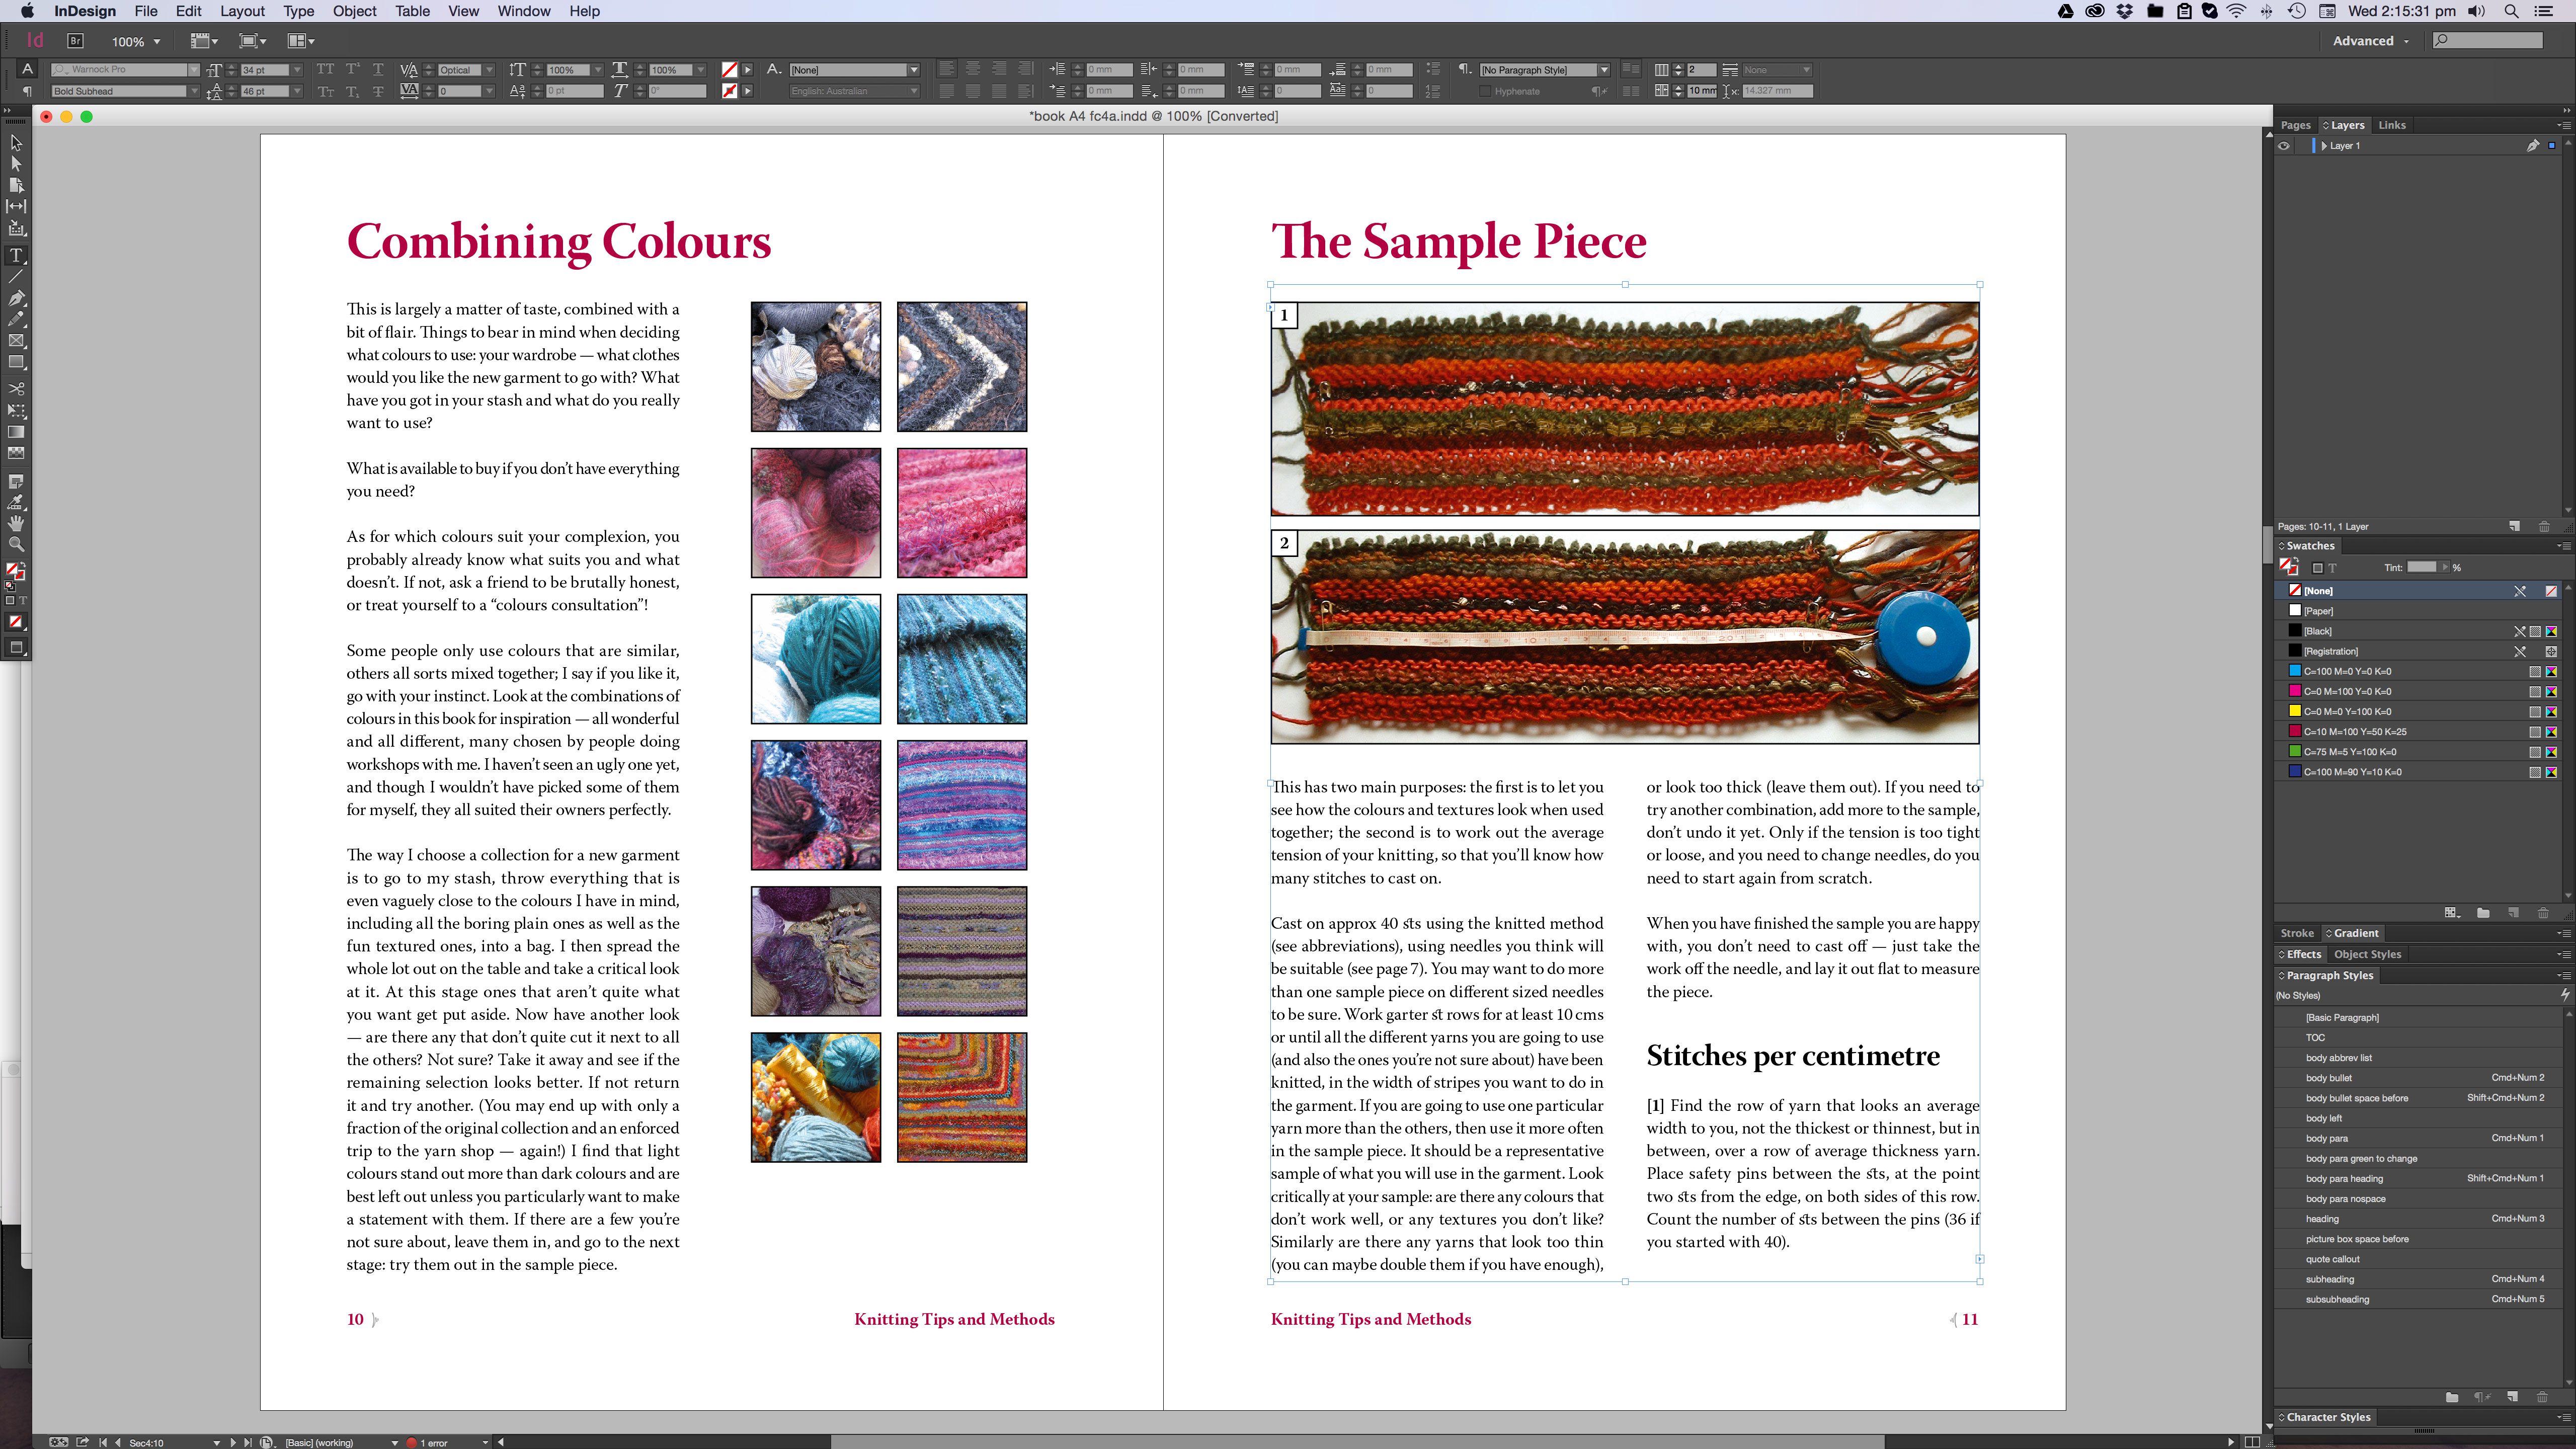 A two-page spread at 100% in InDesign, looking just like the printed book.